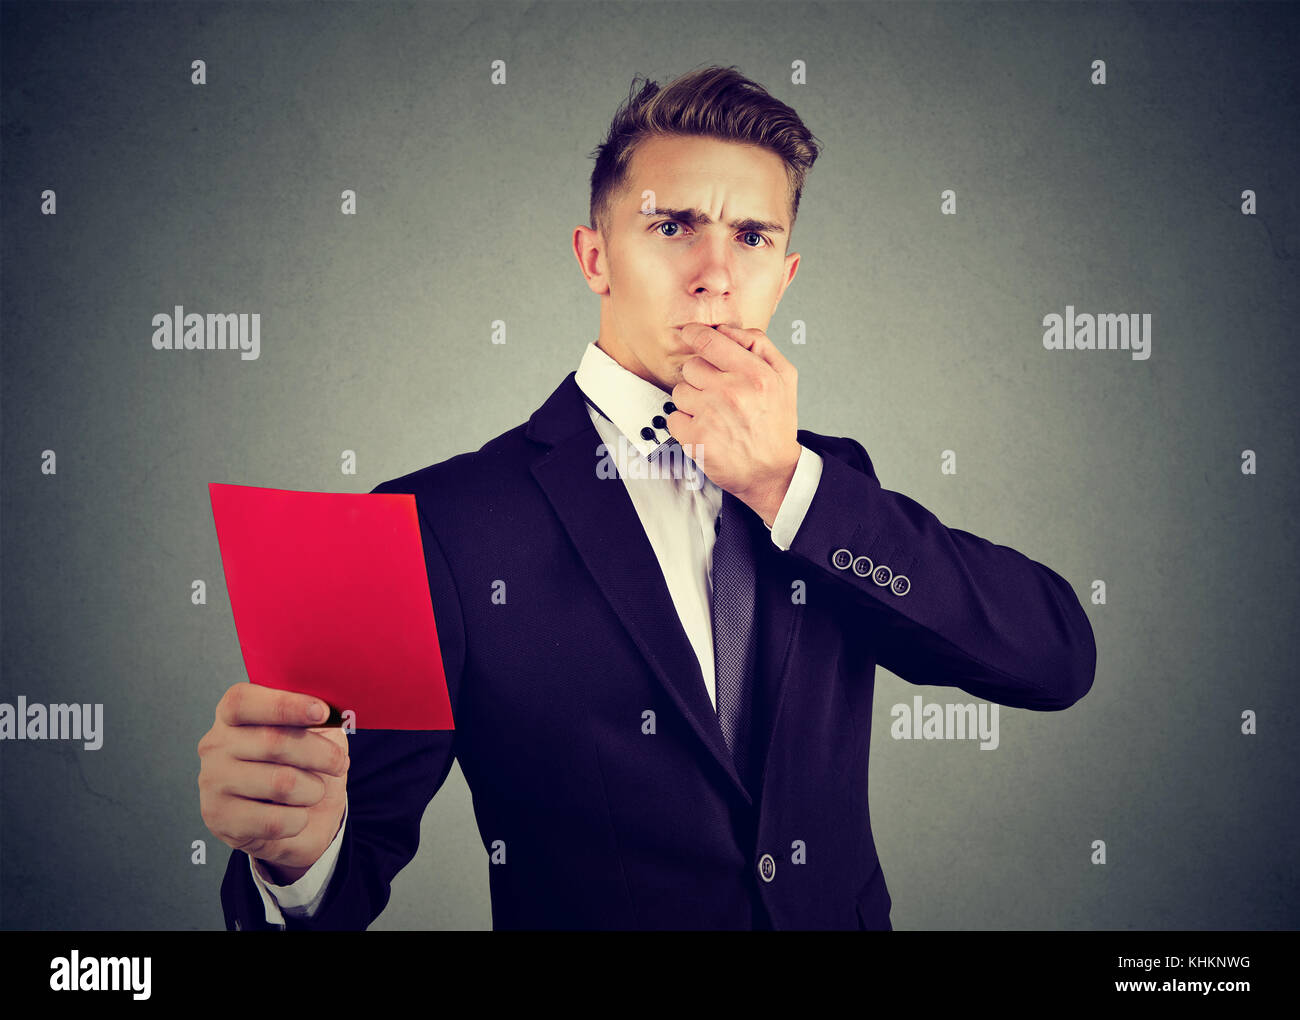 Young frustrated business man referee whistling and showing a red card Stock Photo